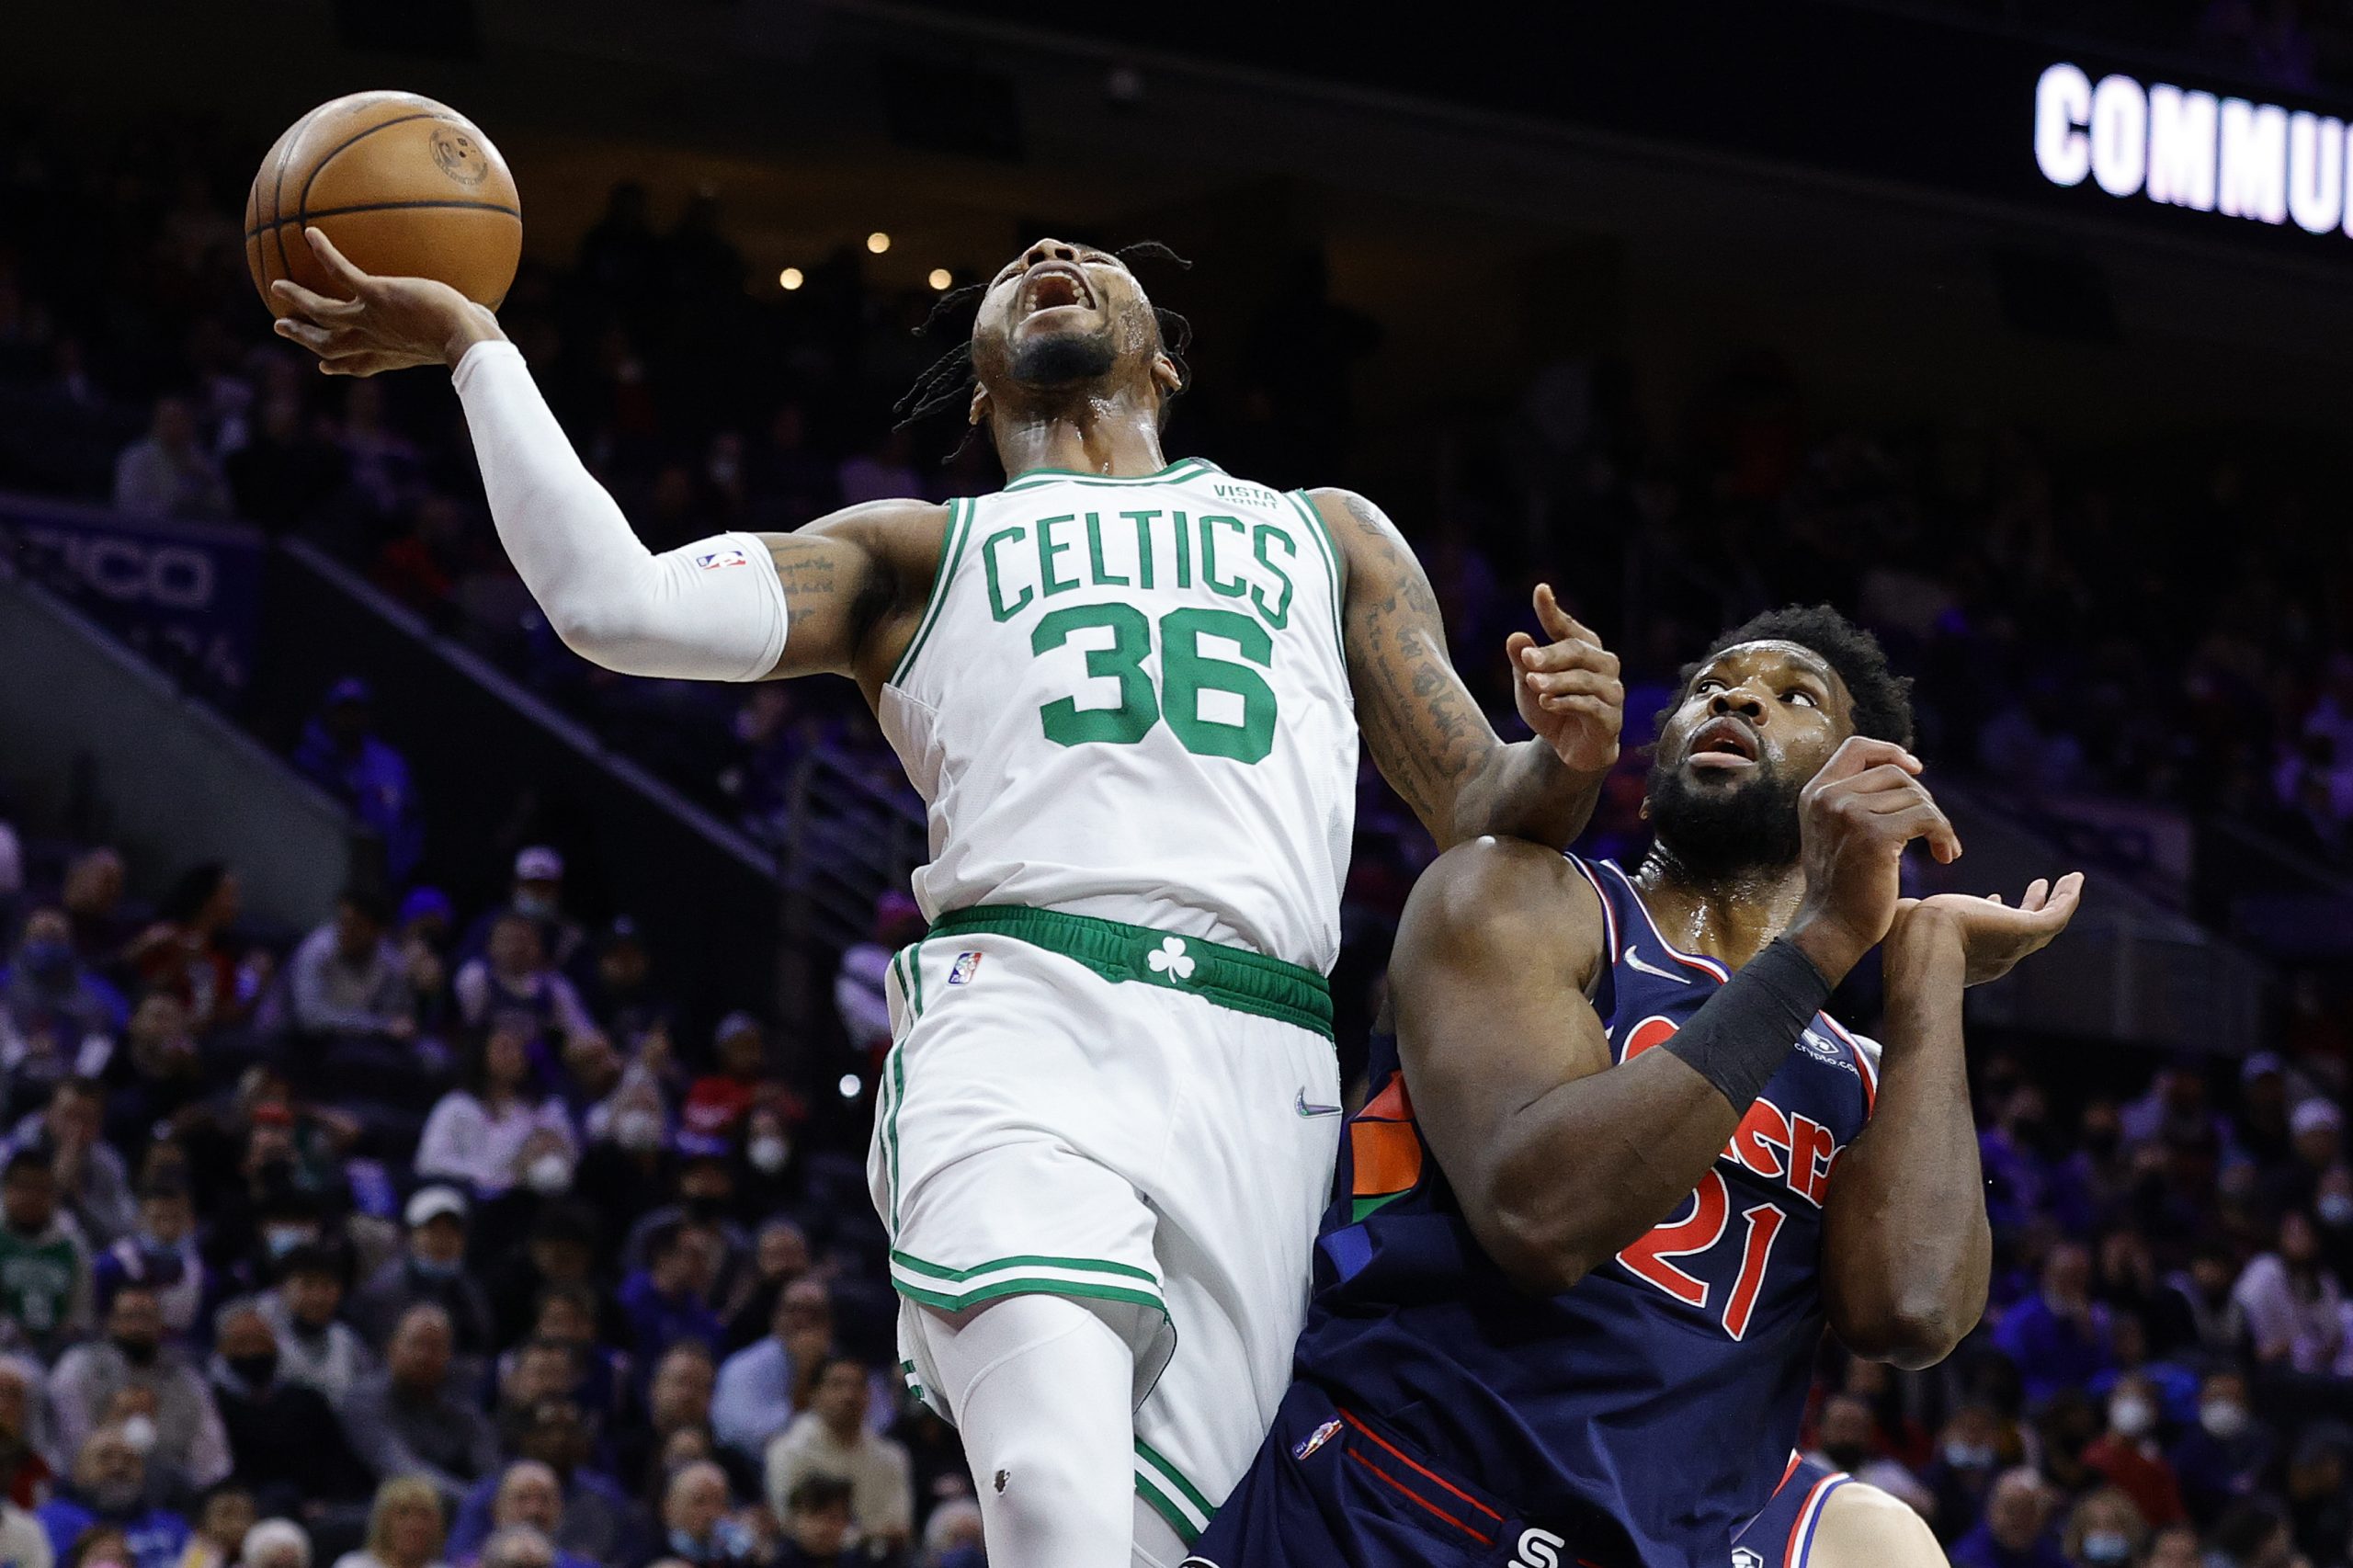 Marcus Smart of the Boston Celtics is fouled by Joel Embiid of the Philadelphia 76ers.